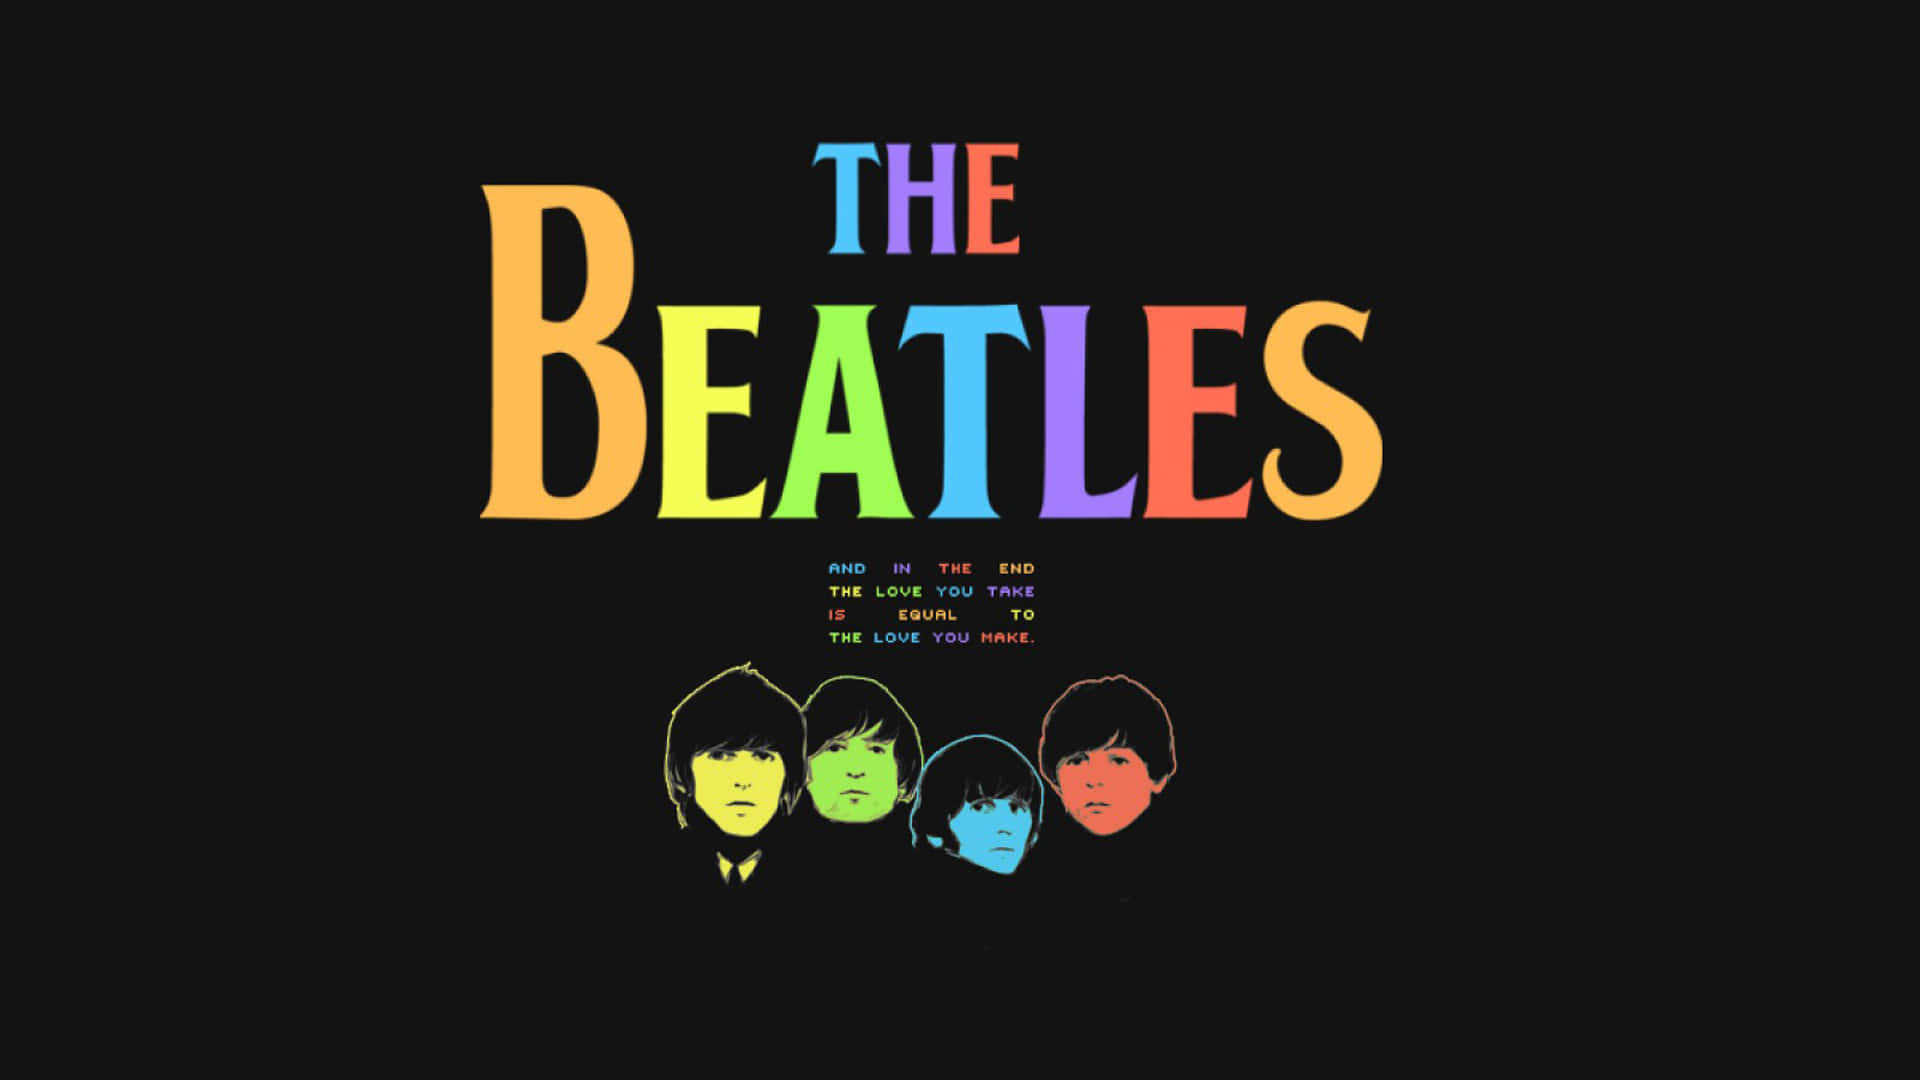 The Beatles, the ground-breaking rock band that changed the world with their music